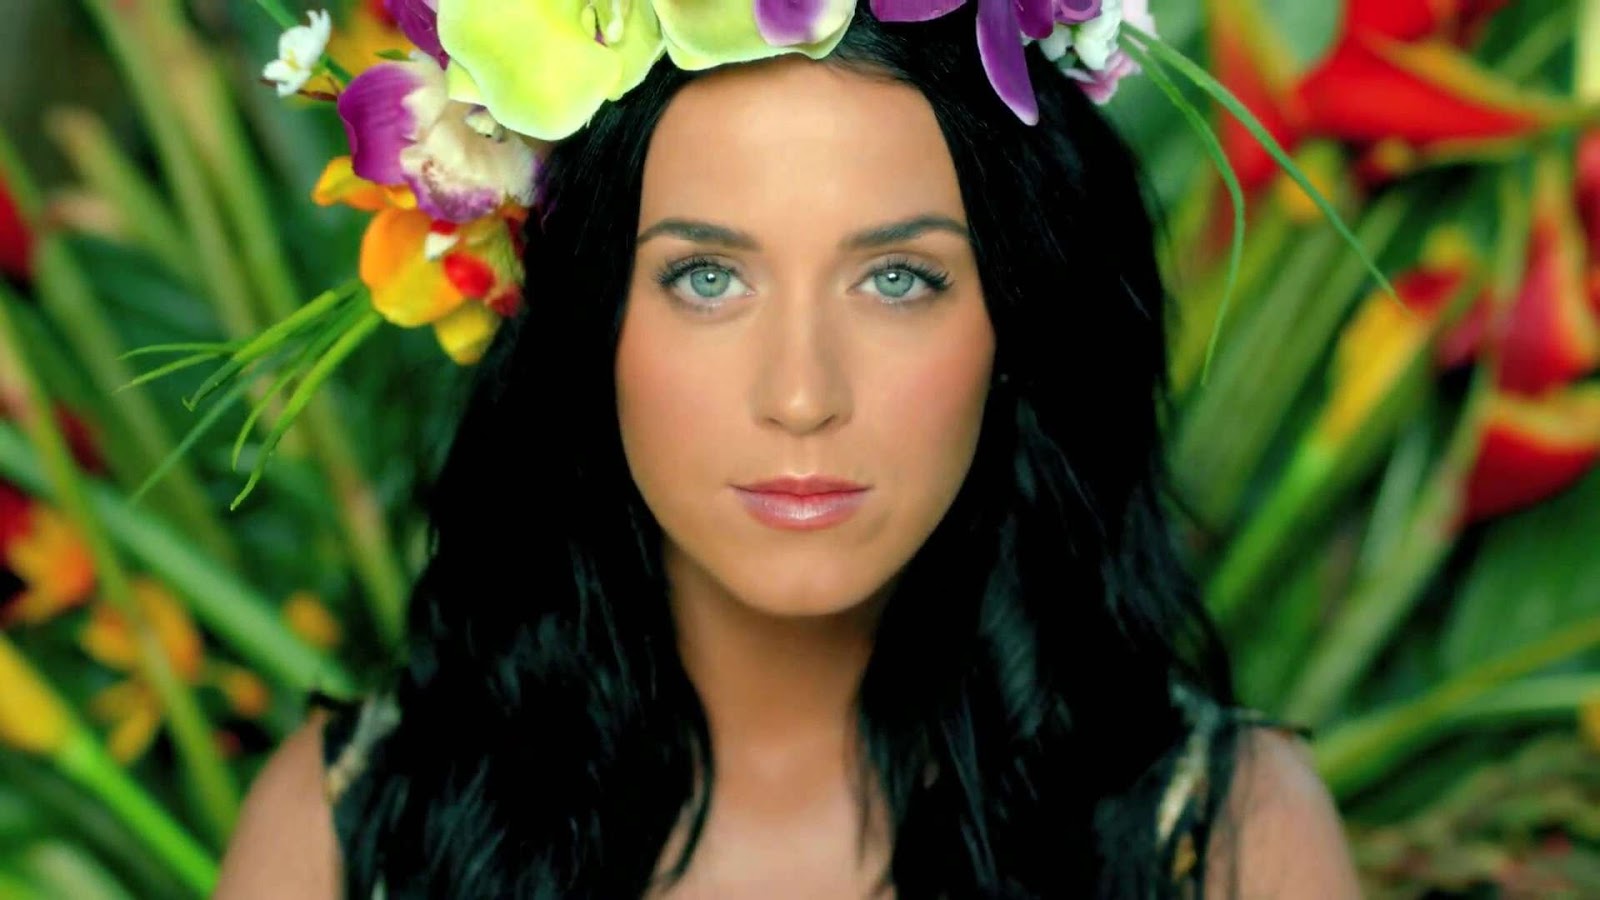 7. Katy Perry's Blue Hair and Makeup in Music Videos - wide 6